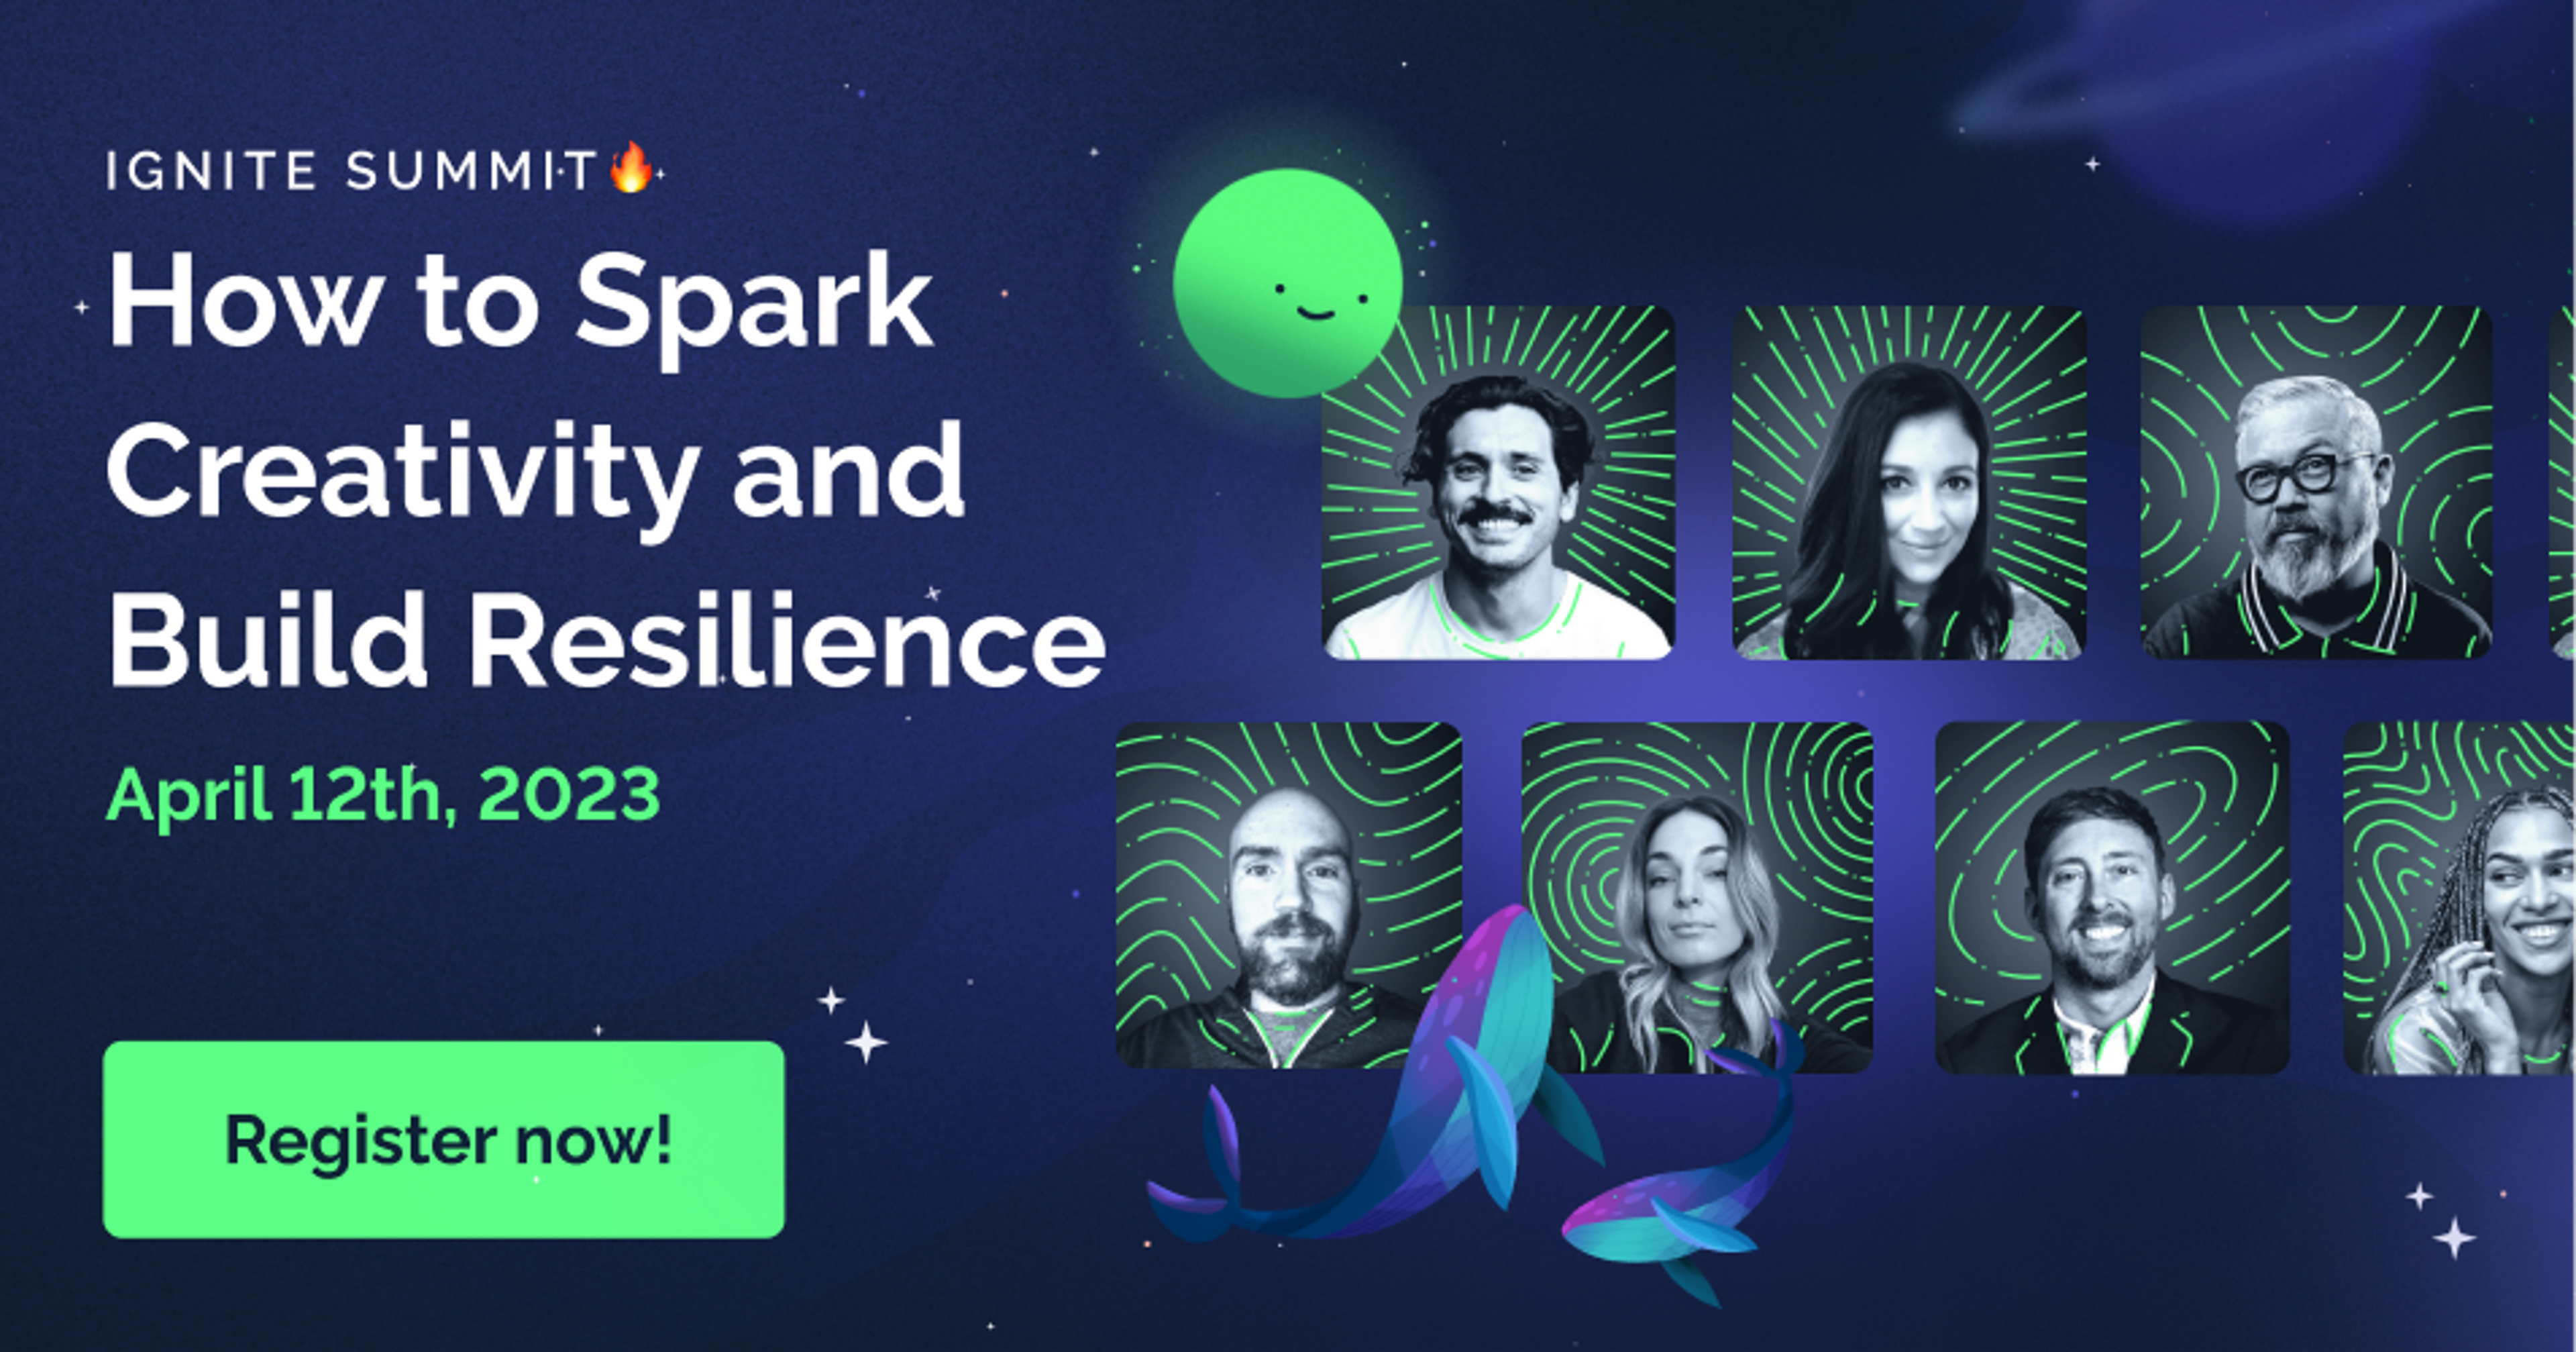 Ignite: How to Spark Creativity and Build Resilience